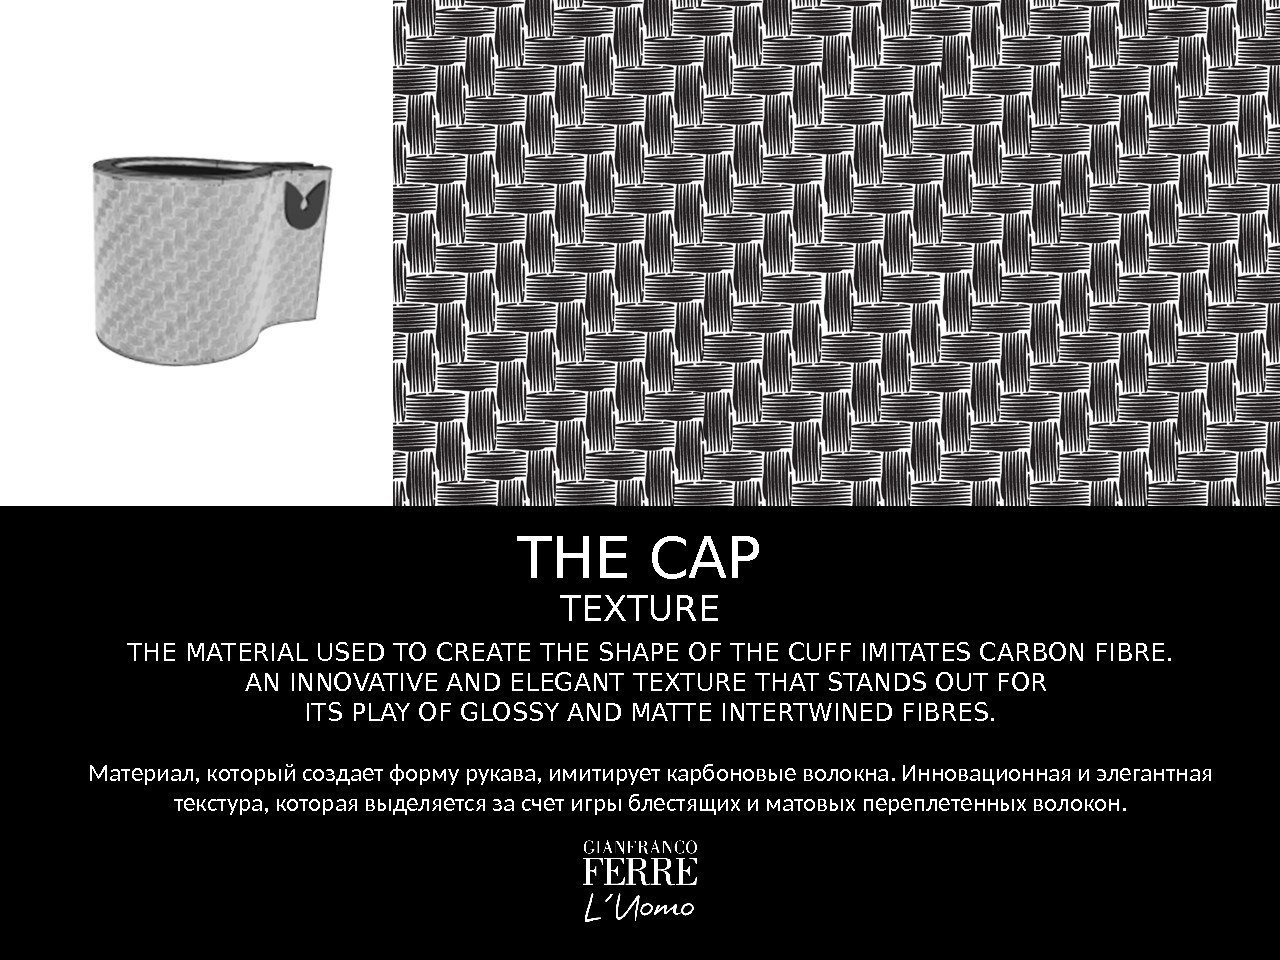 THE CAP THE MATERIAL USED TO CREATE THE SHAPE OF THE CUFF IMITATES CARBON